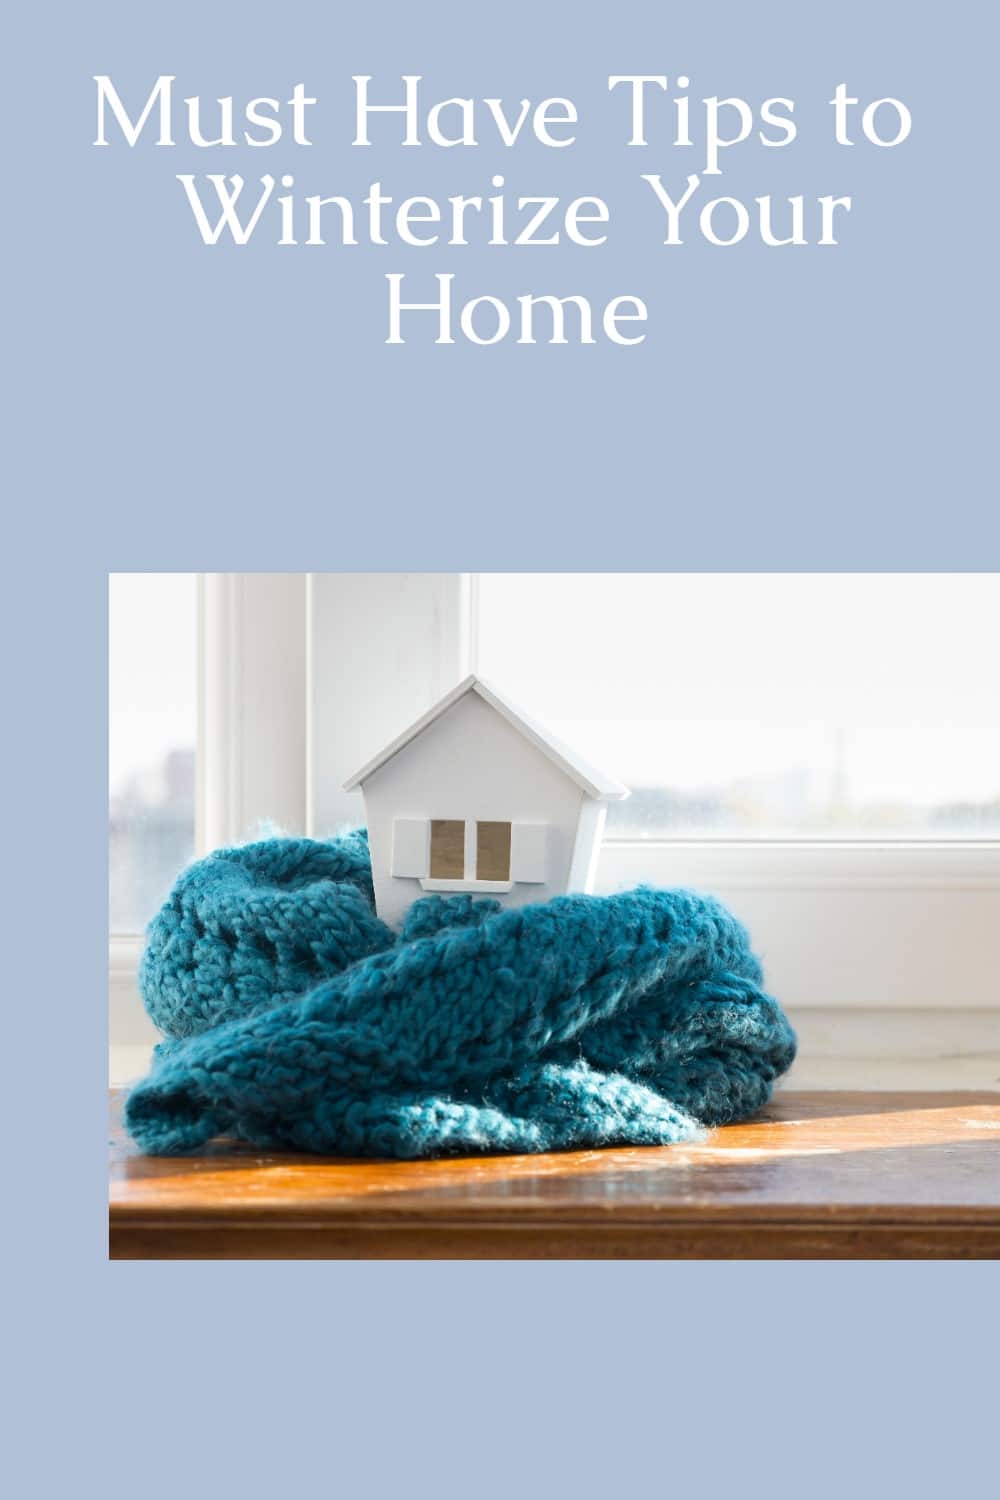 Must have tips to winterize your home. When the cold winds blow you want to make sure your home is ready to keep you warm and cozy. via @repurposedlife